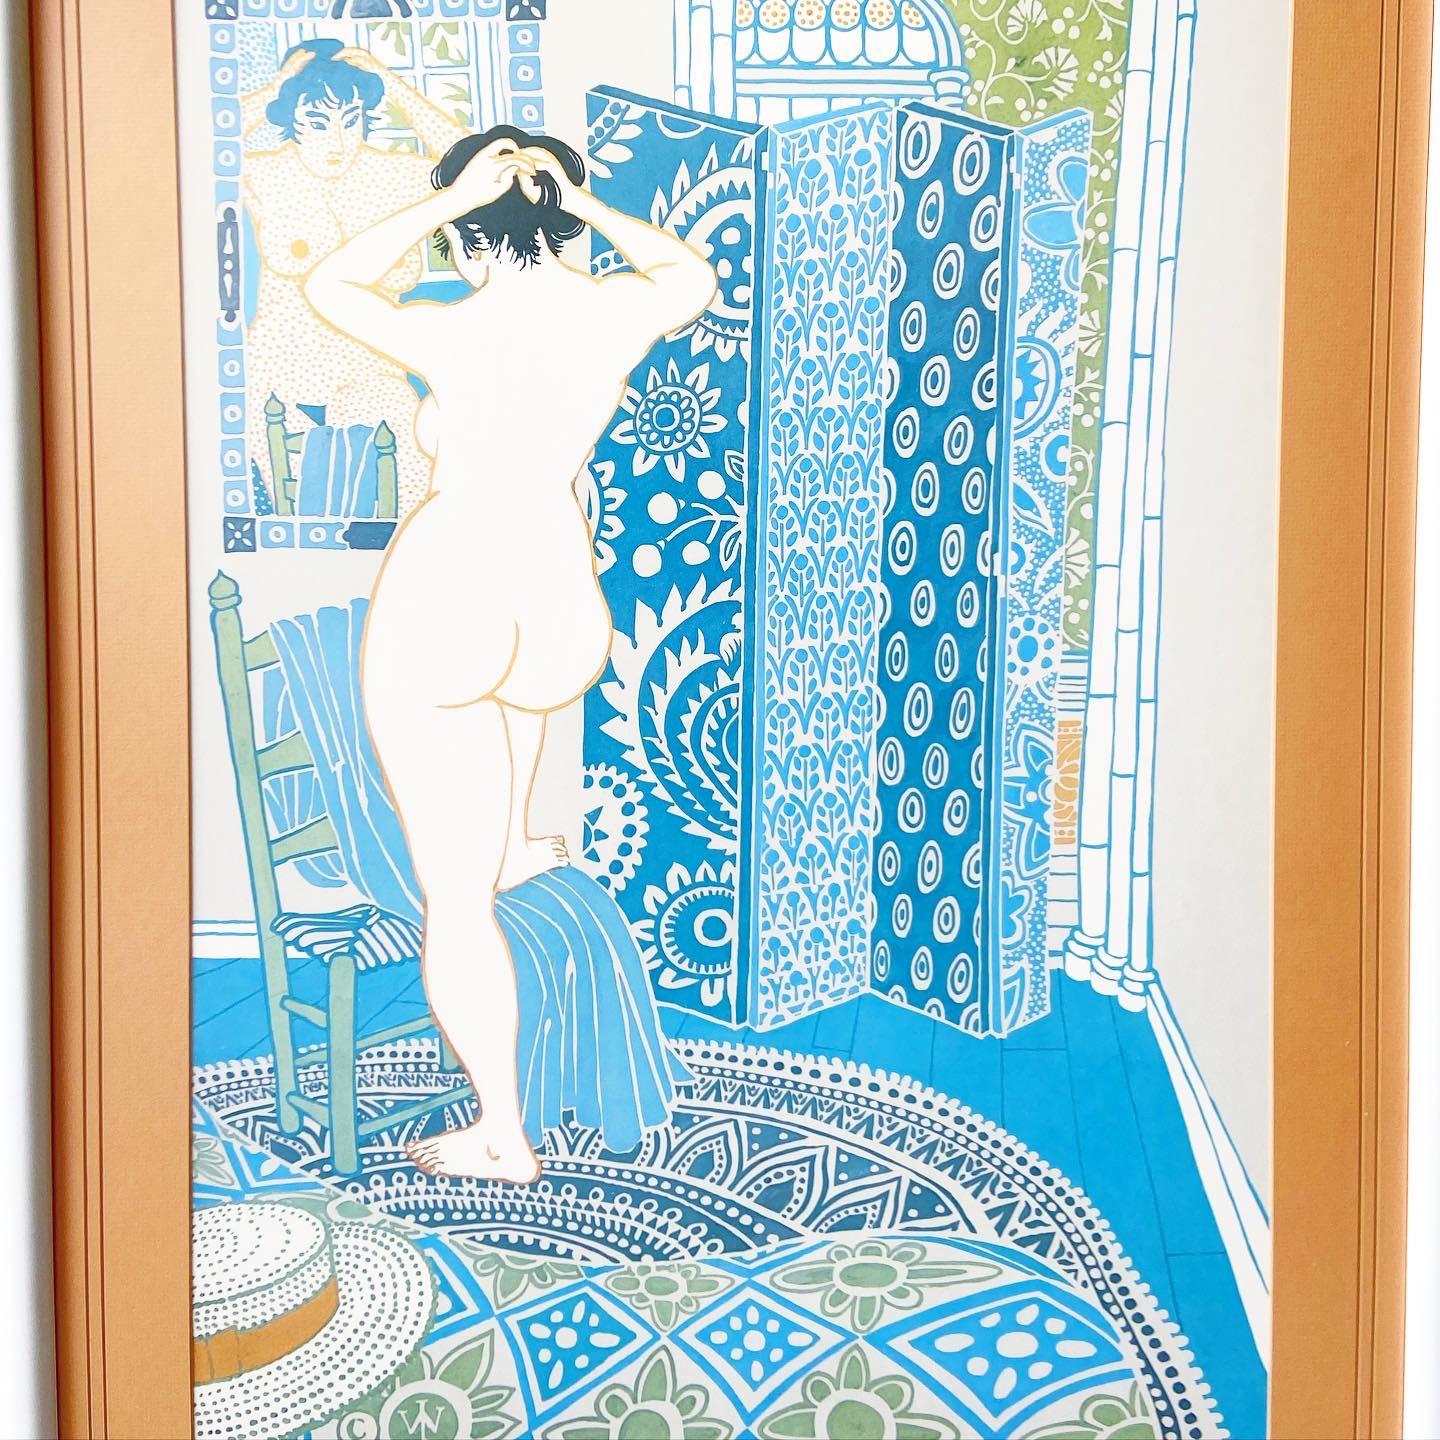 Beautiful Asian art print featuring a woman drying off after a shower.

Additional information:
Material: Paper, Wood
Color: Blue, Orange
Style: Asian, Vintage
Time Period: 1990s
Dimension: 29” L x 1” D x 41” H